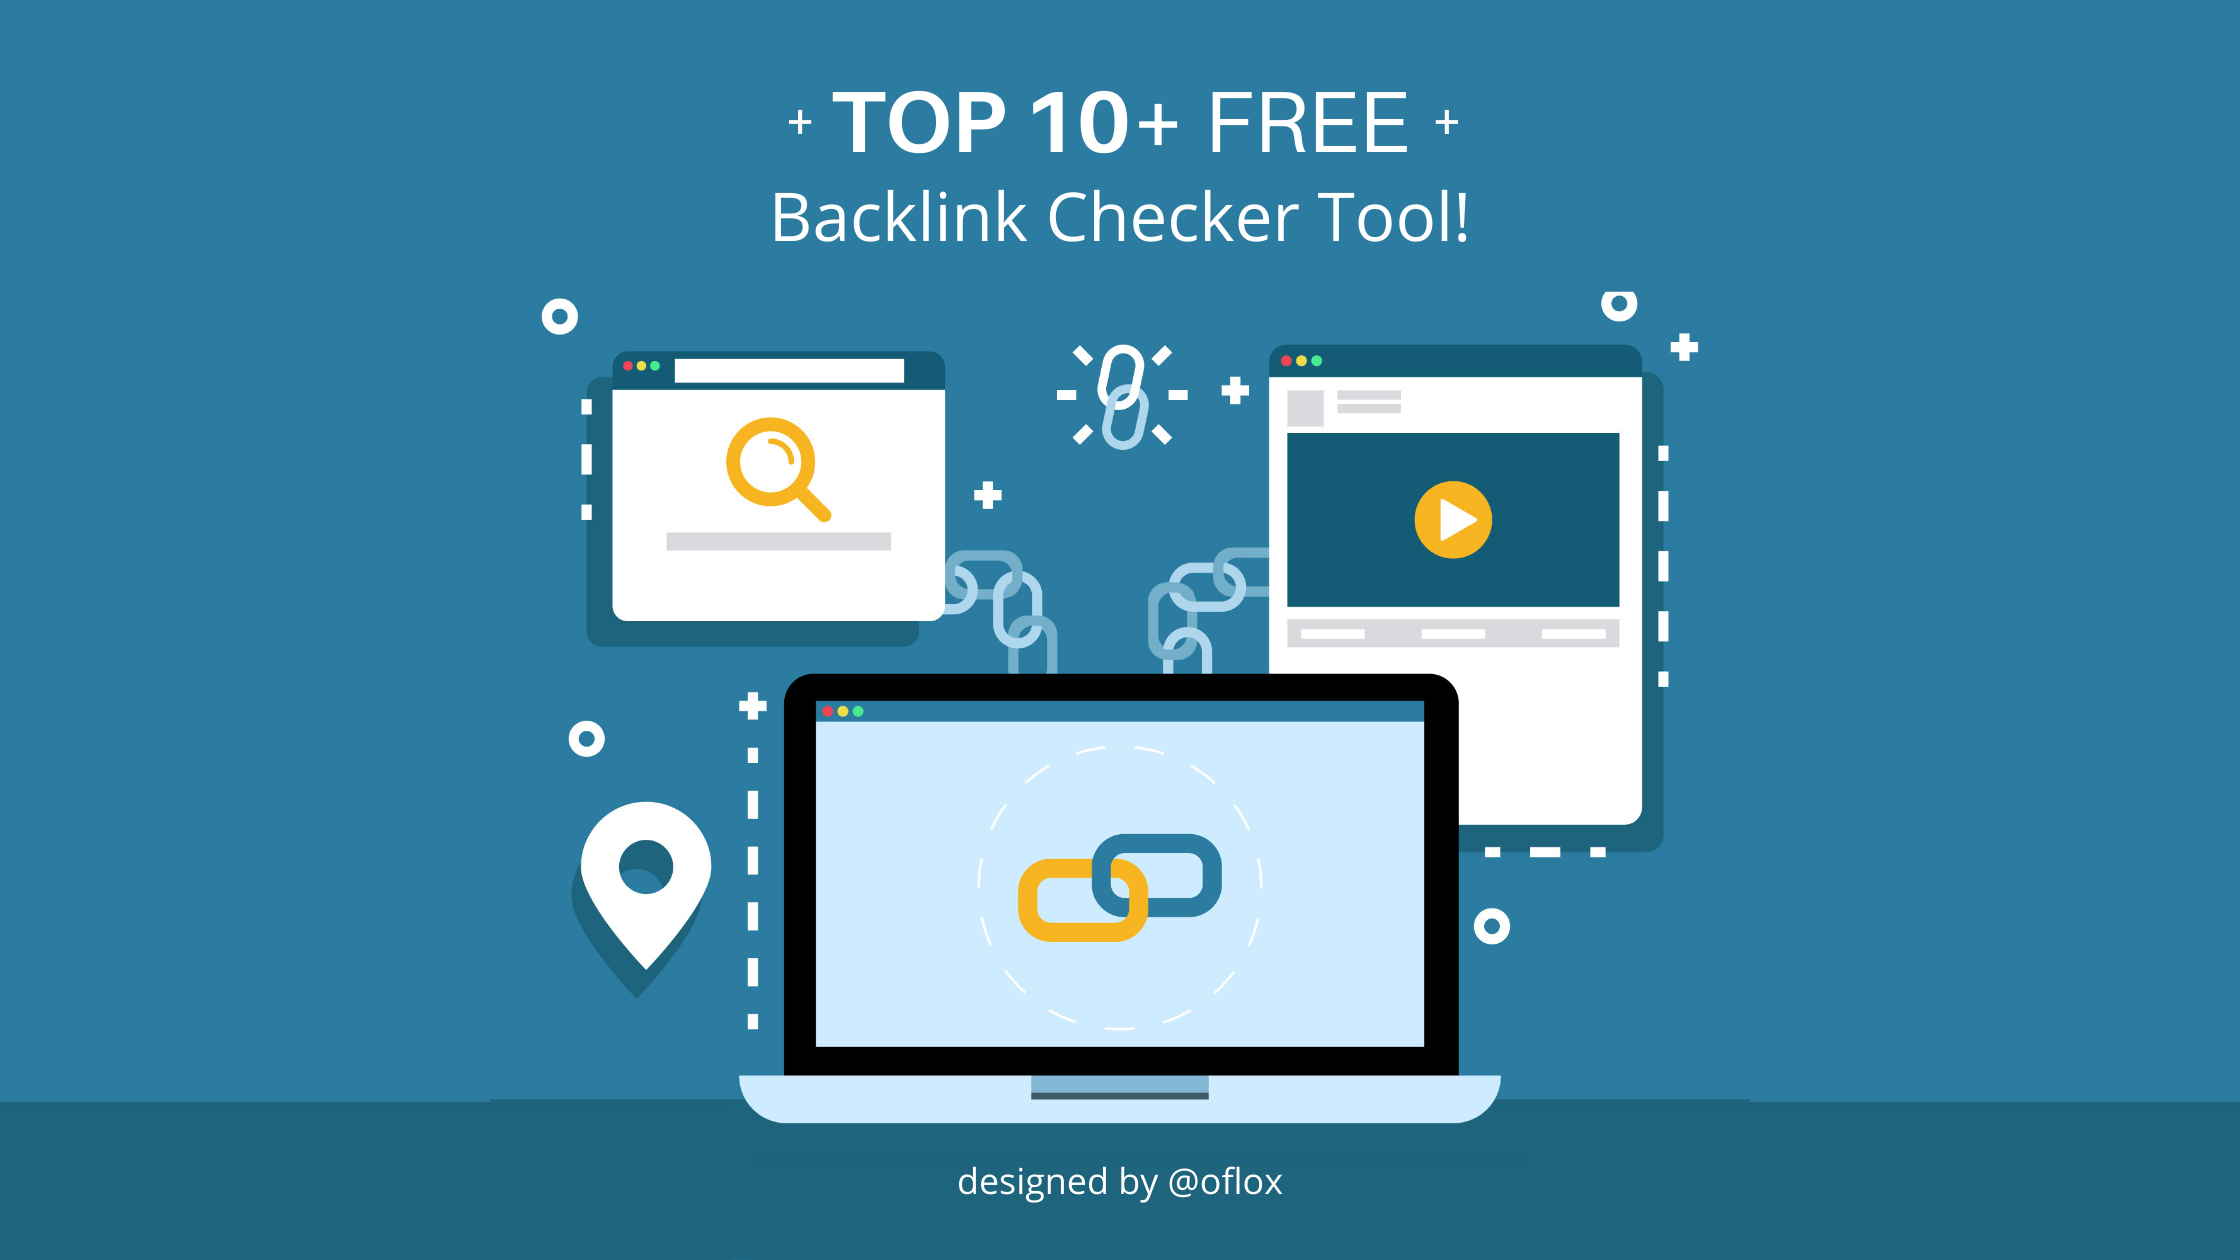 Take Home Lessons On backlink monitoring